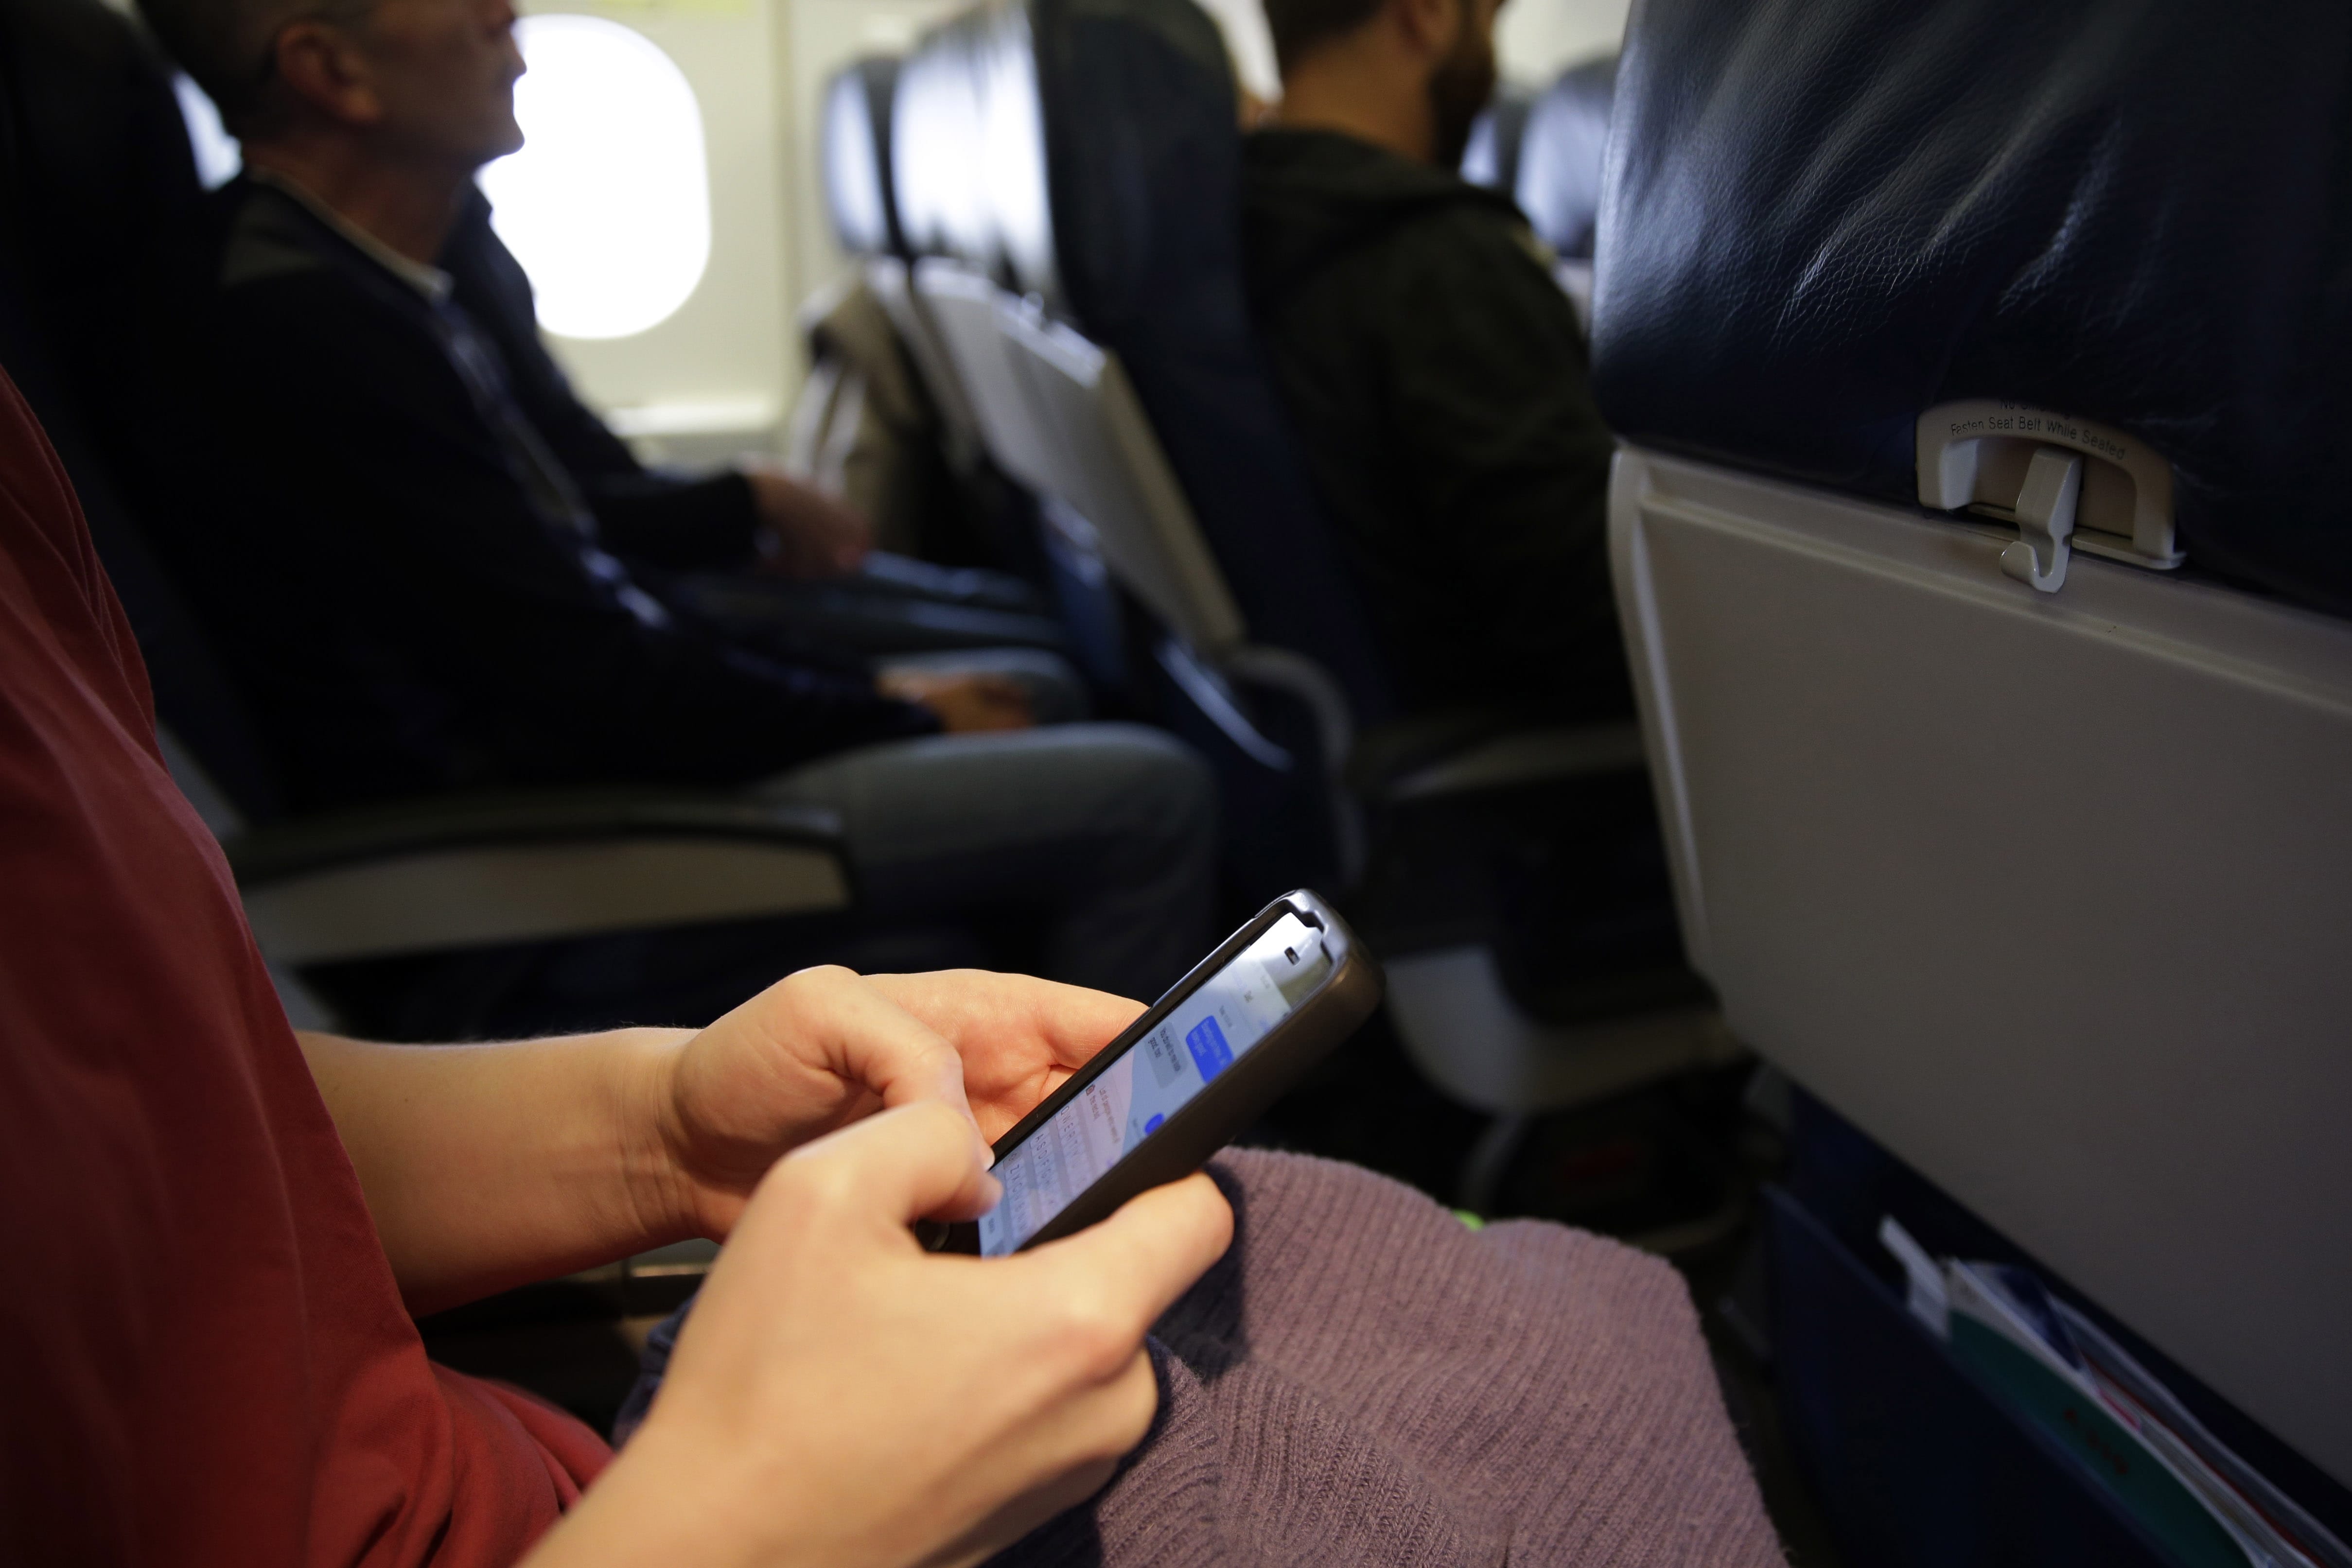 While one government agency considers allowing cellphone calls on passenger planes, another now wants to ban them.